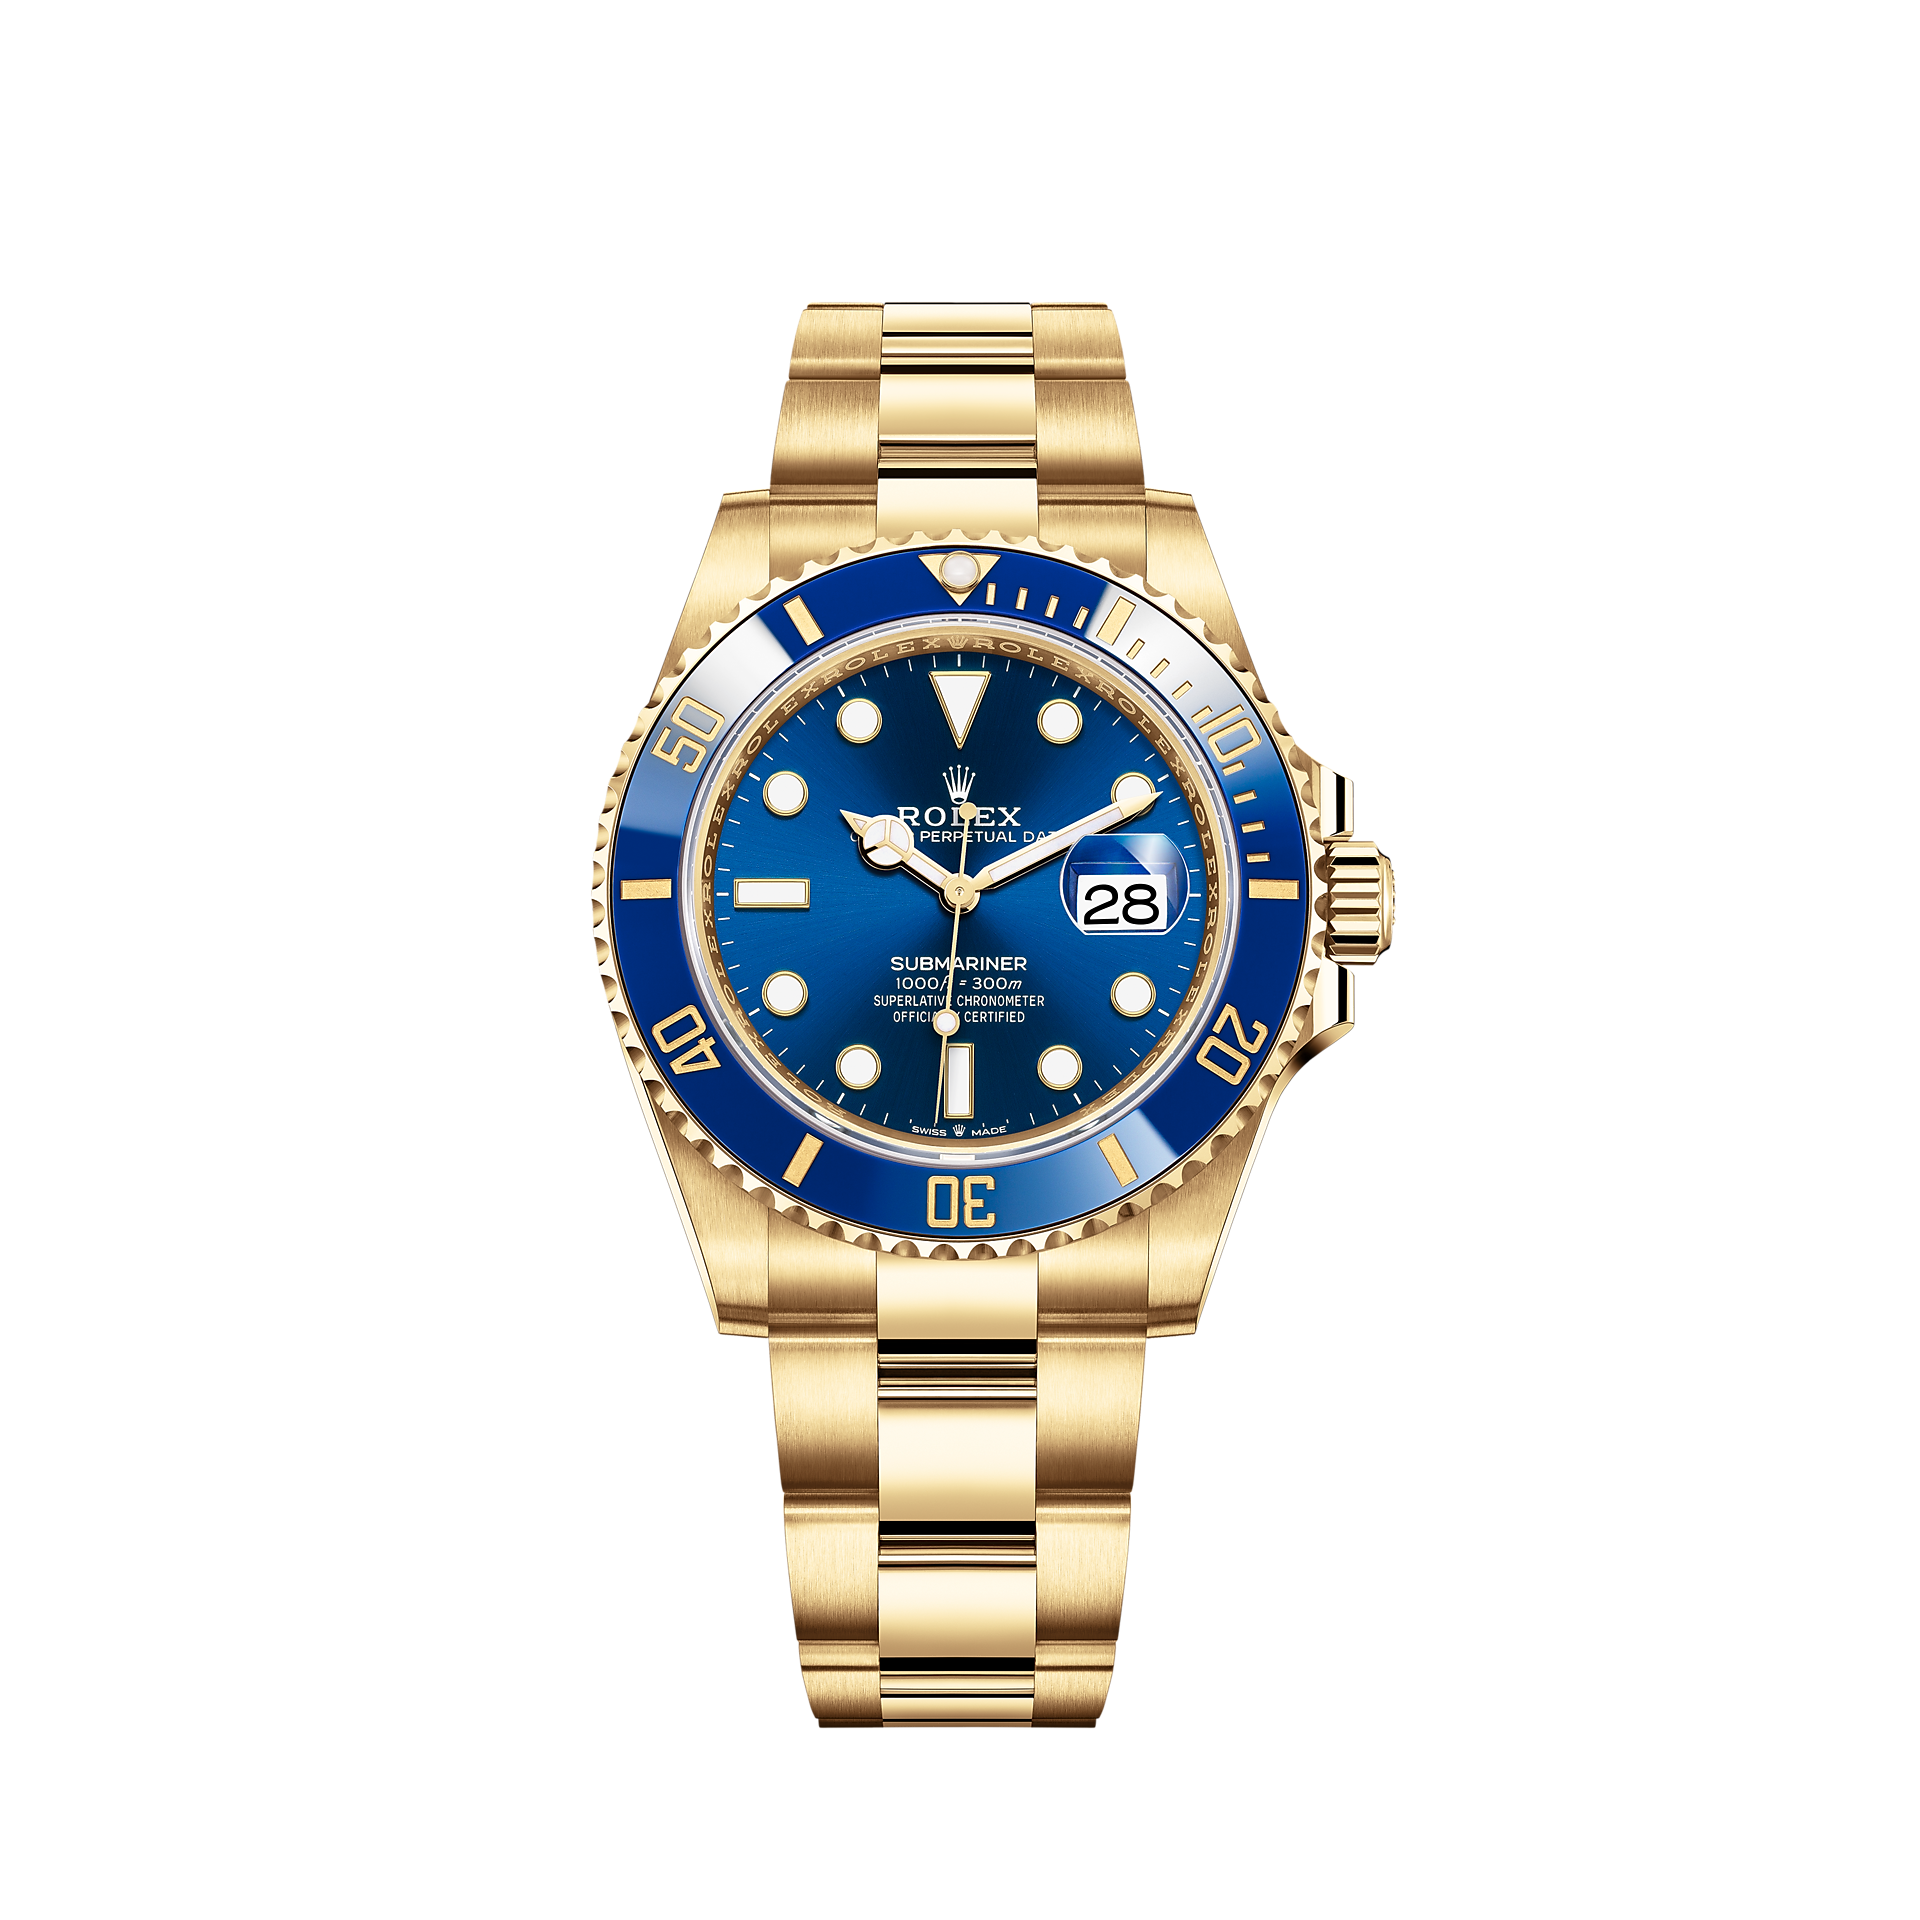 Rolex Submariner Date watch: 18 ct yellow gold - M126618LB-0002